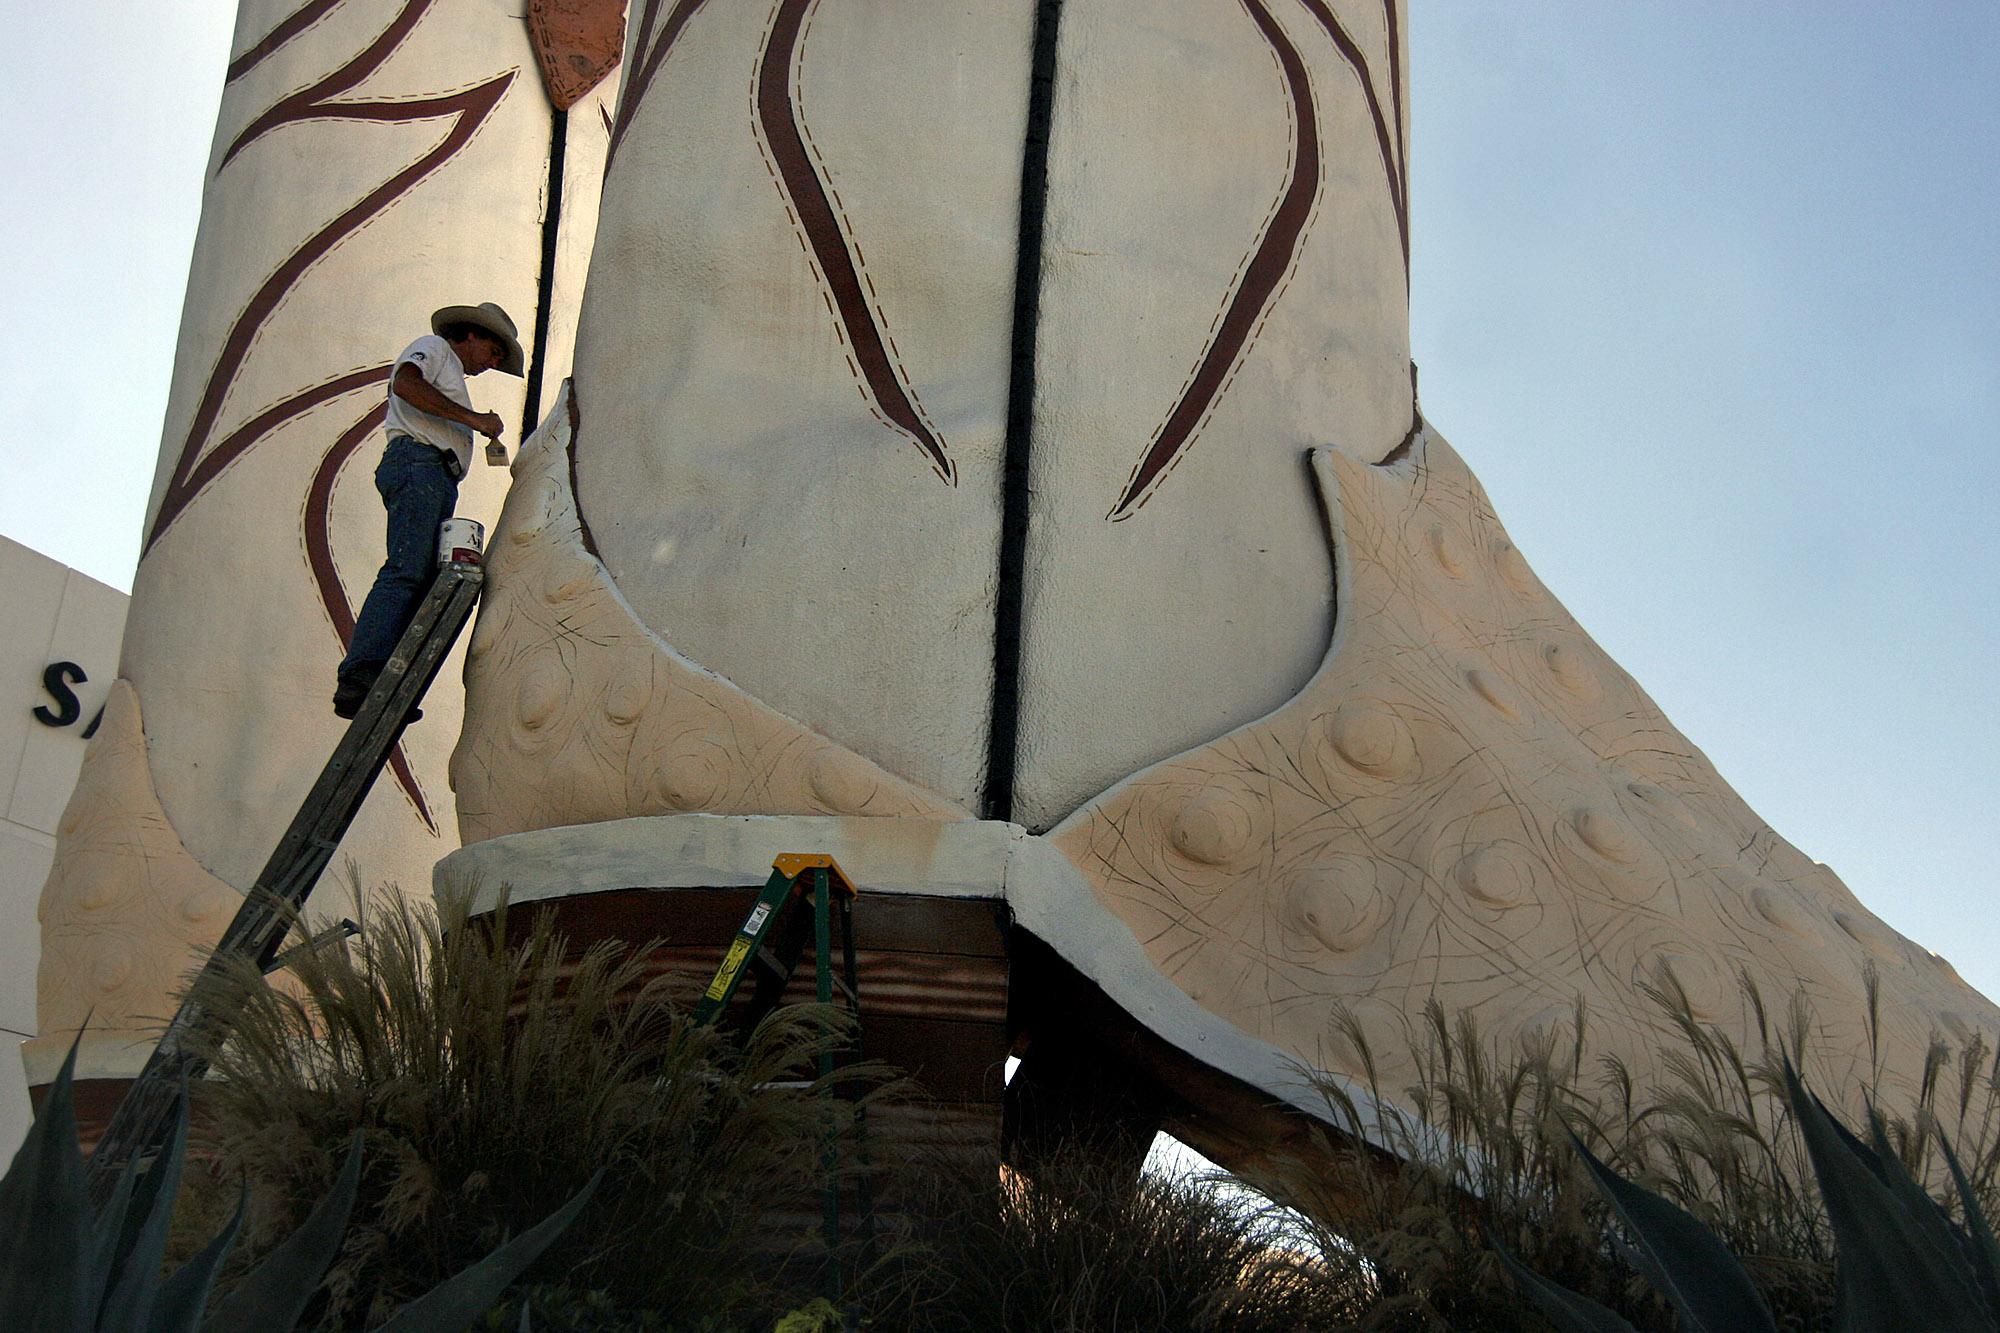 I painted the giant boots at North Star Mall in San Antonio : r/texas